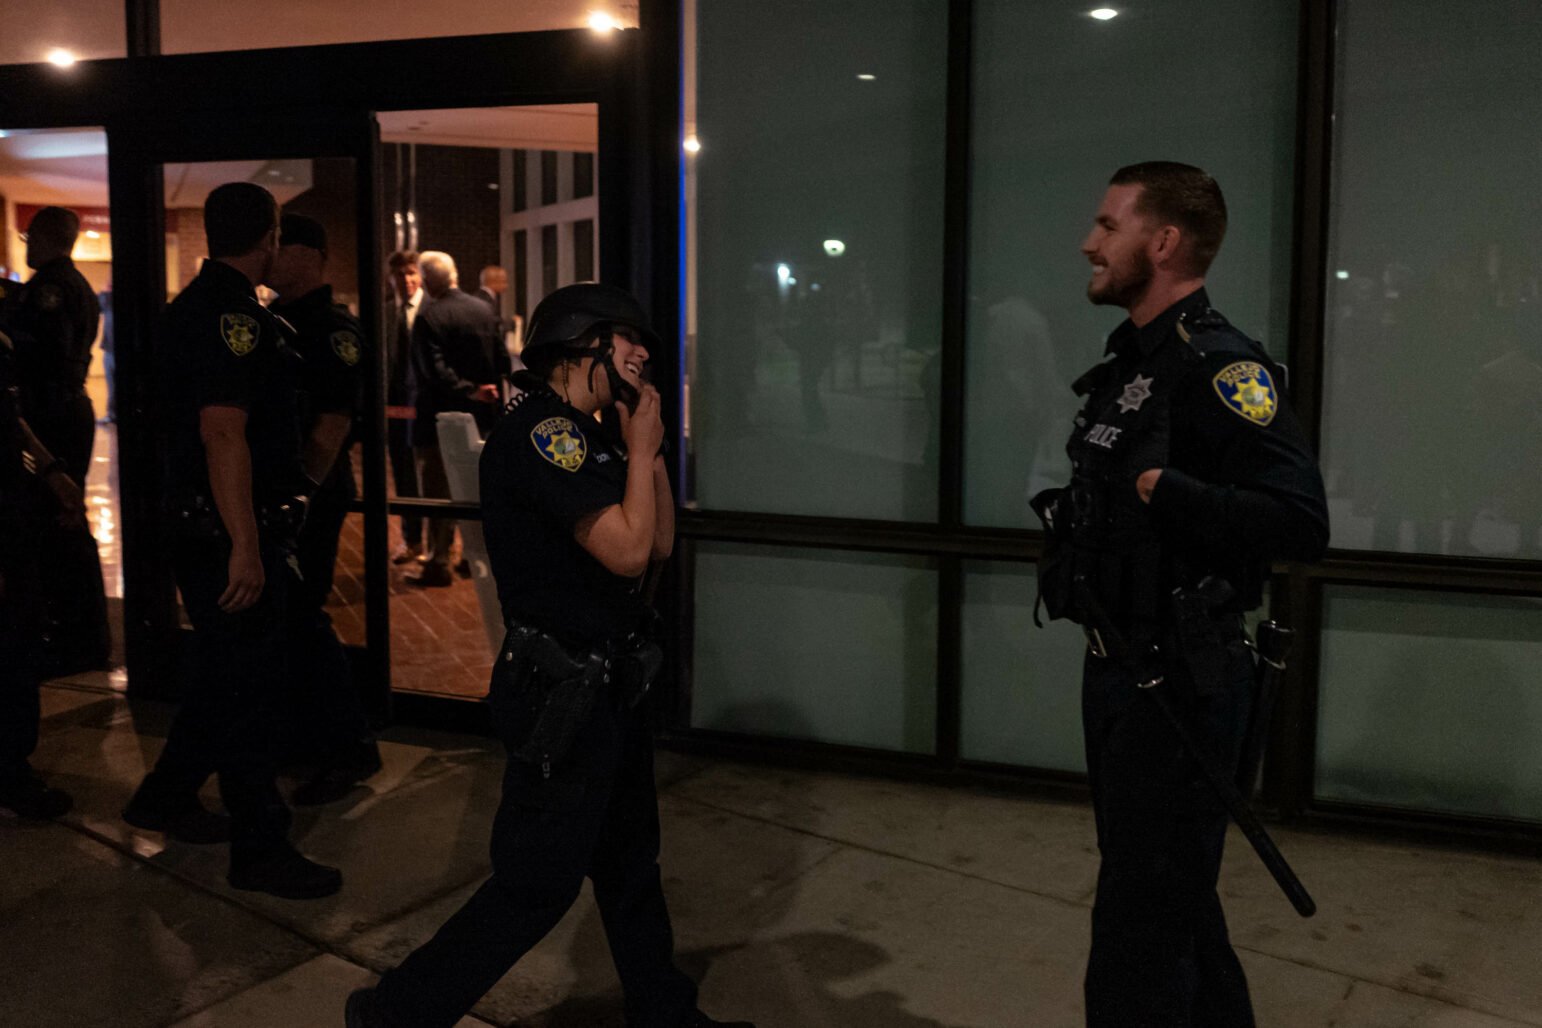 Two police officers in conversing outside a building at night. The officer on the left is a woman and is taking off a tactical helmet. The officer on the right is a man. Both are smiling broadly. Other officers and people are visible in the background.